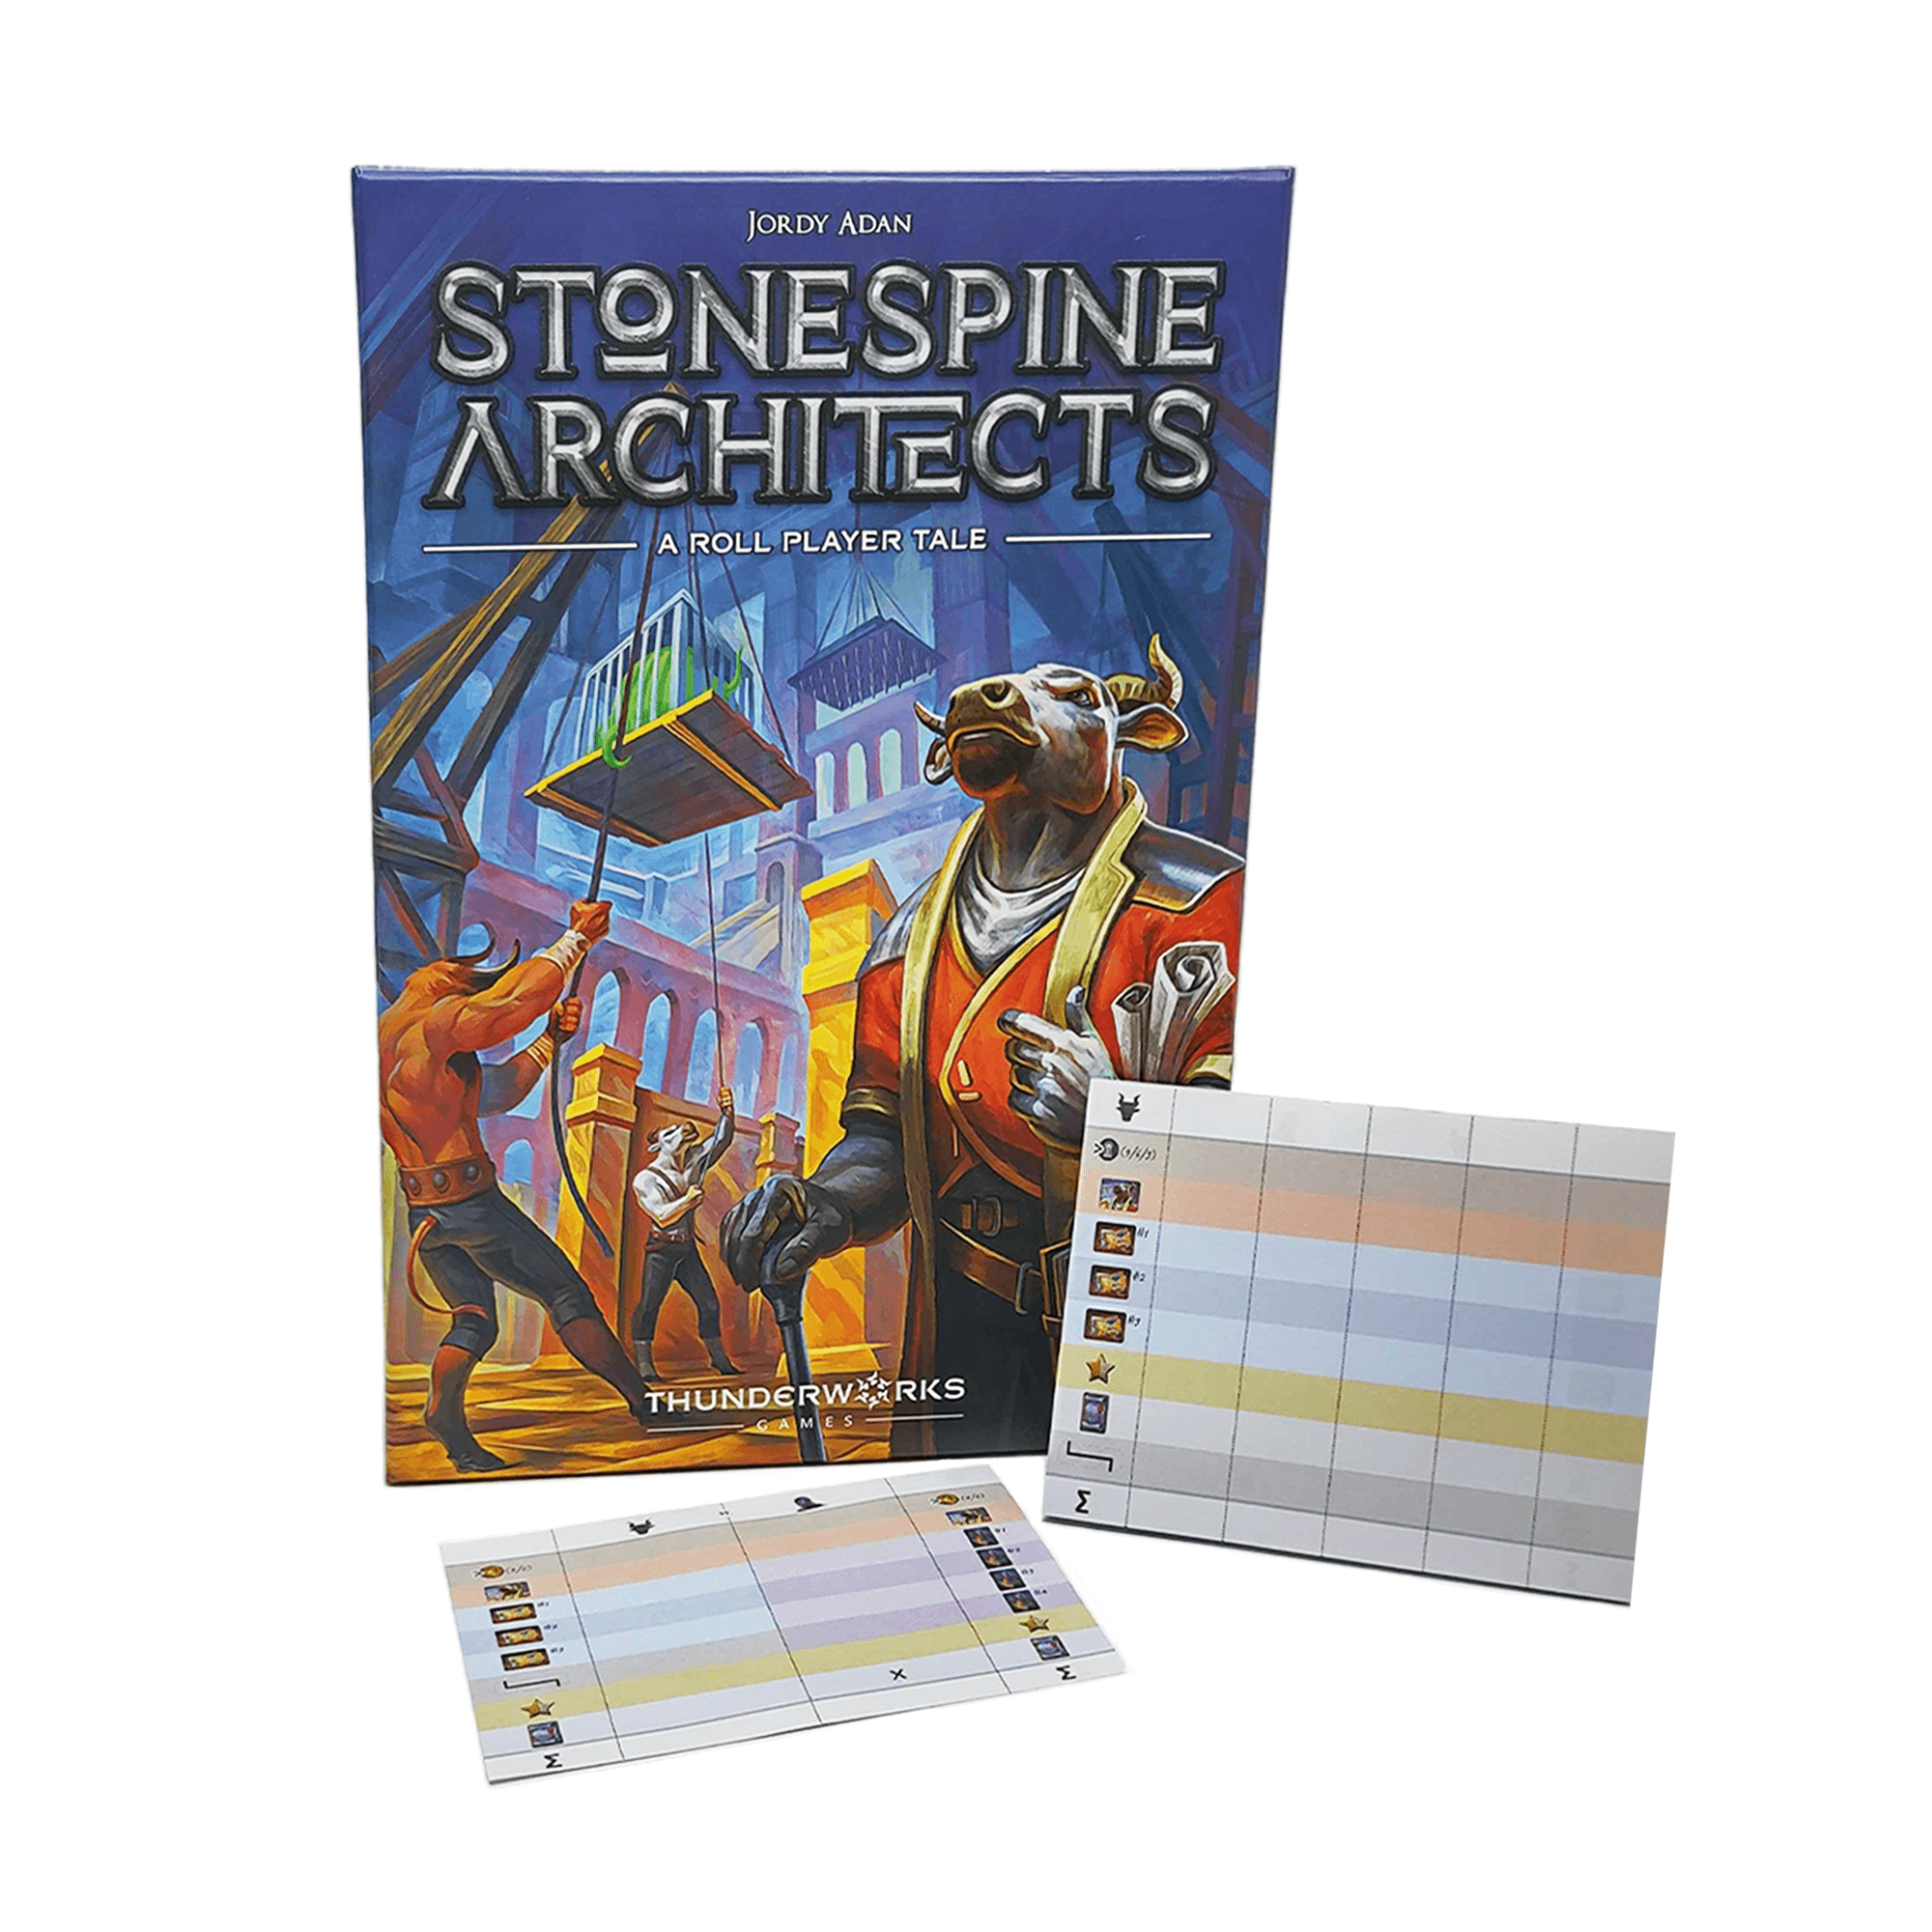 Scorepad sheets shown together with Stonespine Architects board game box